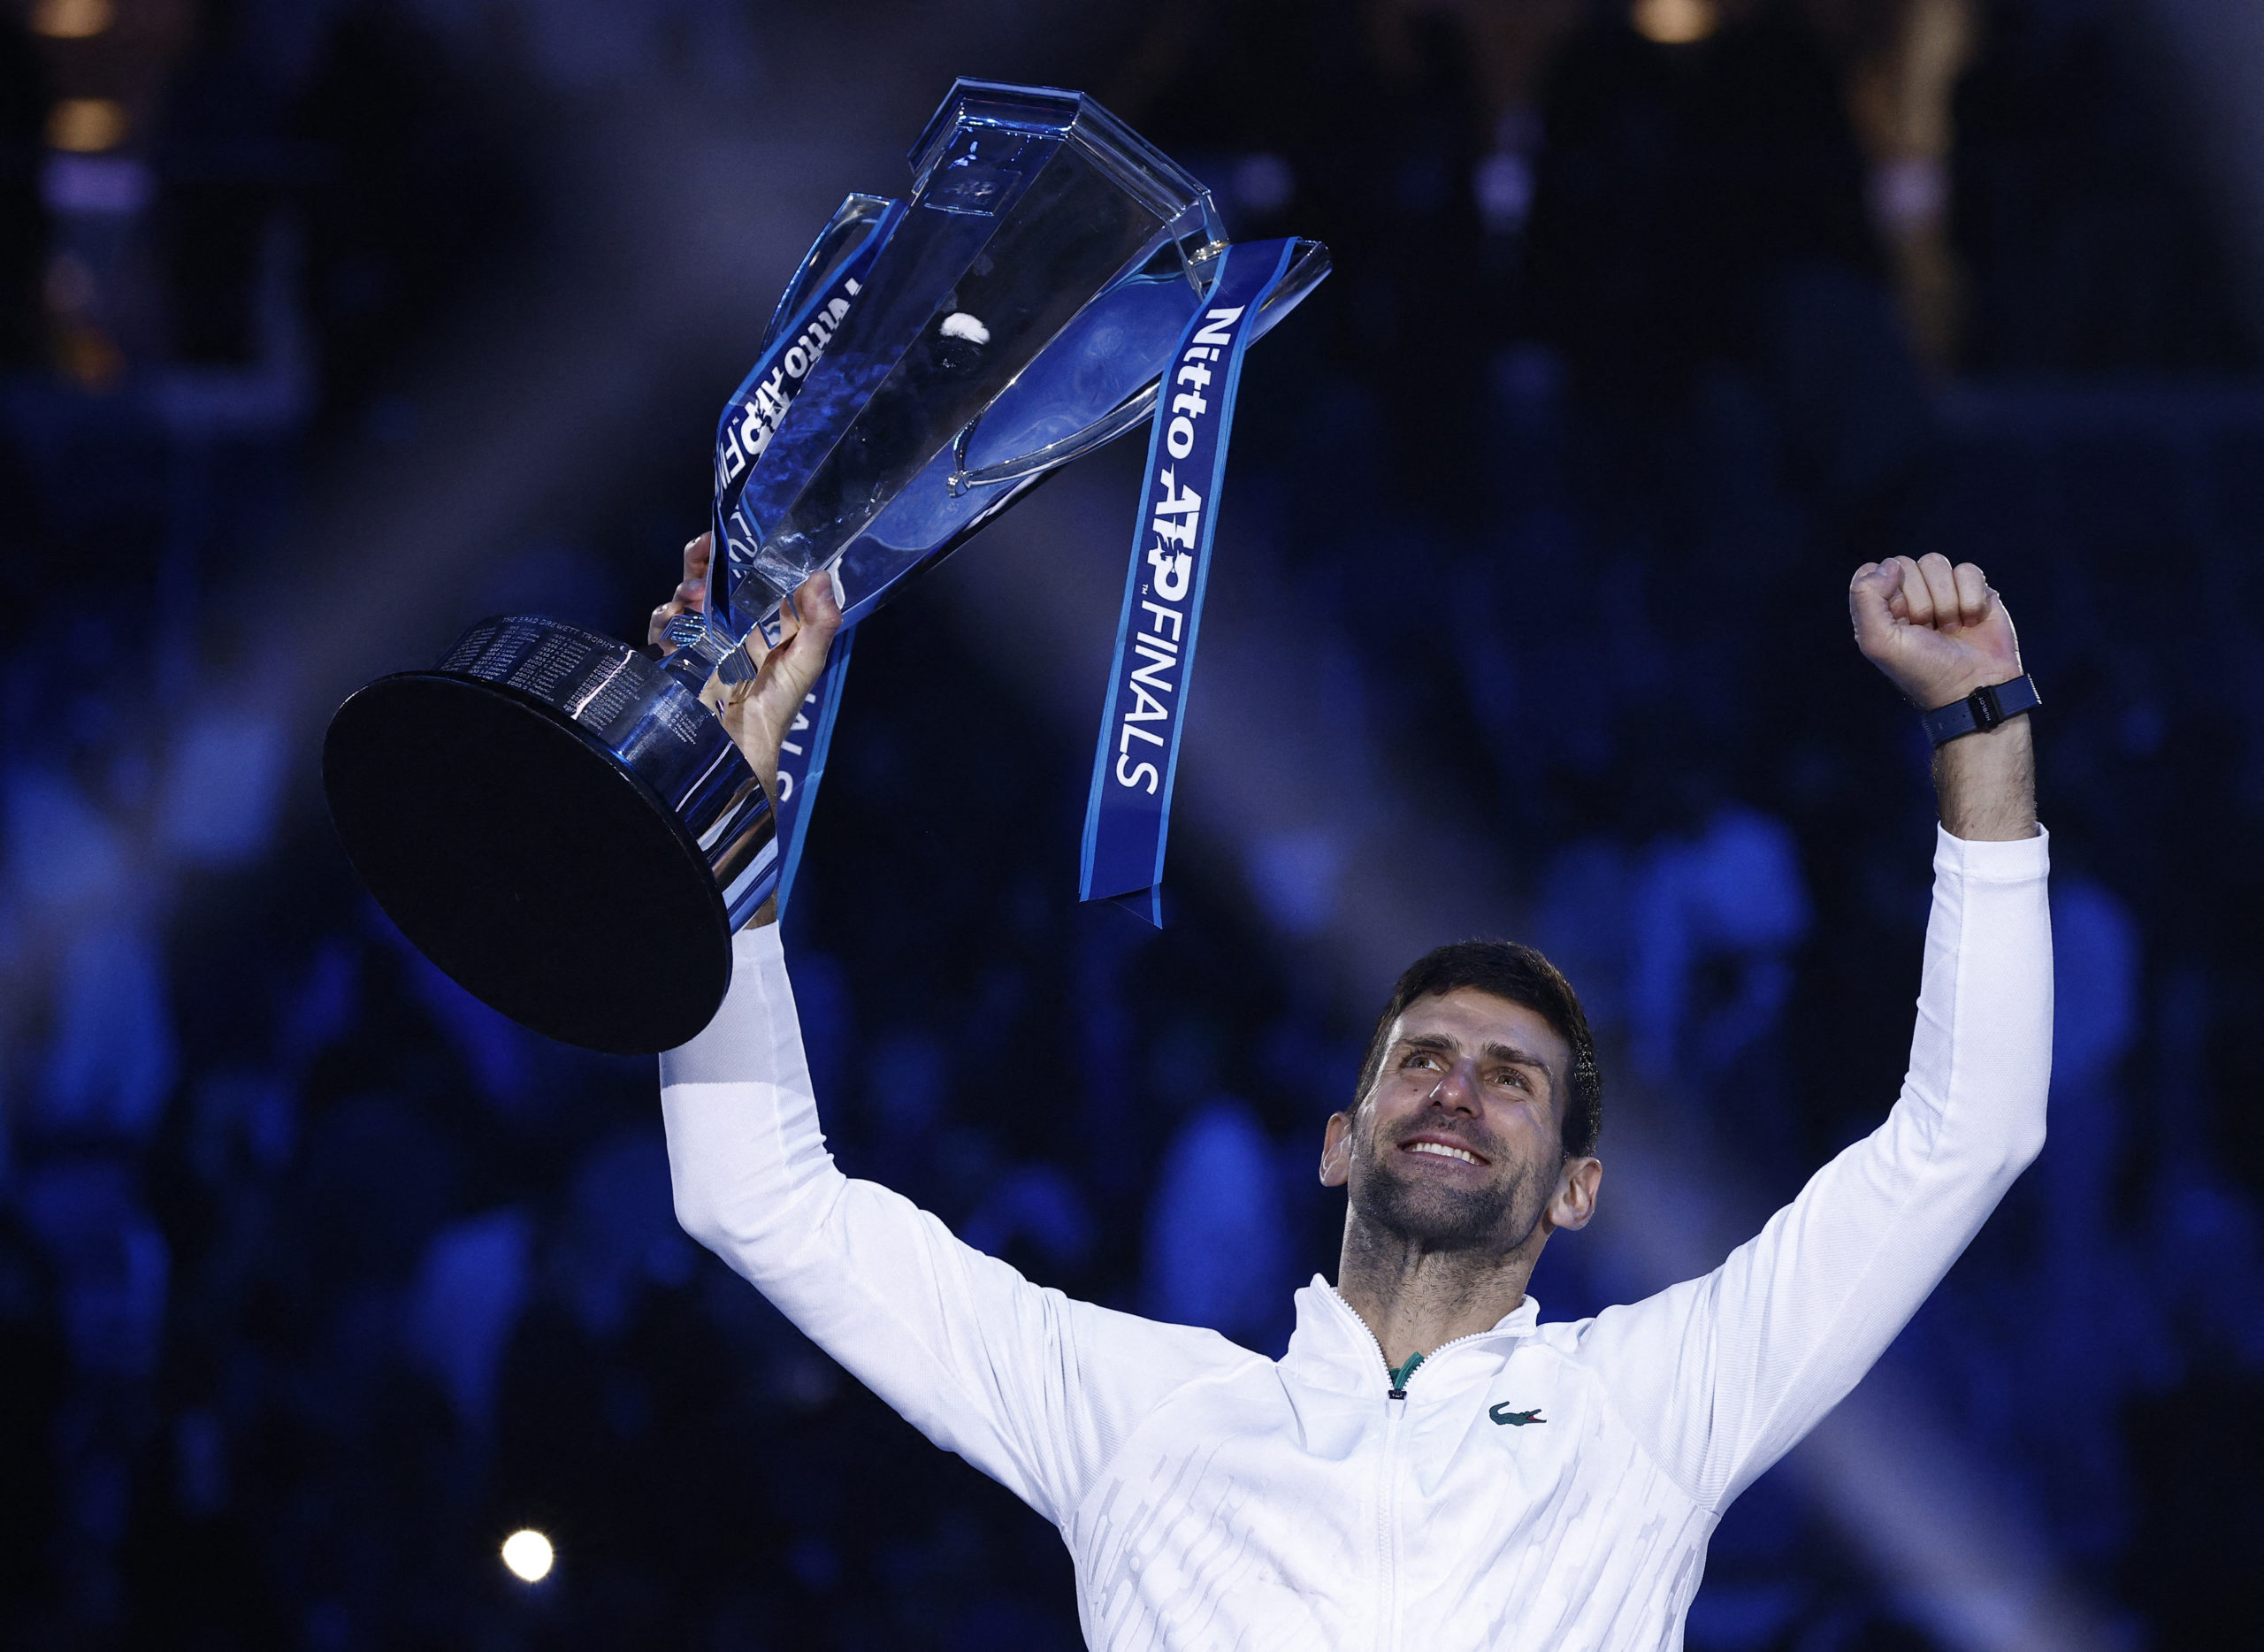 Tennis - ATP Finals Turin - Pala Alpitour, Turin, Italy - November 20, 2022 Serbia's Novak Djokovic celebrates with the trophy after winning the men's singles final against Norway's Casper Ruud